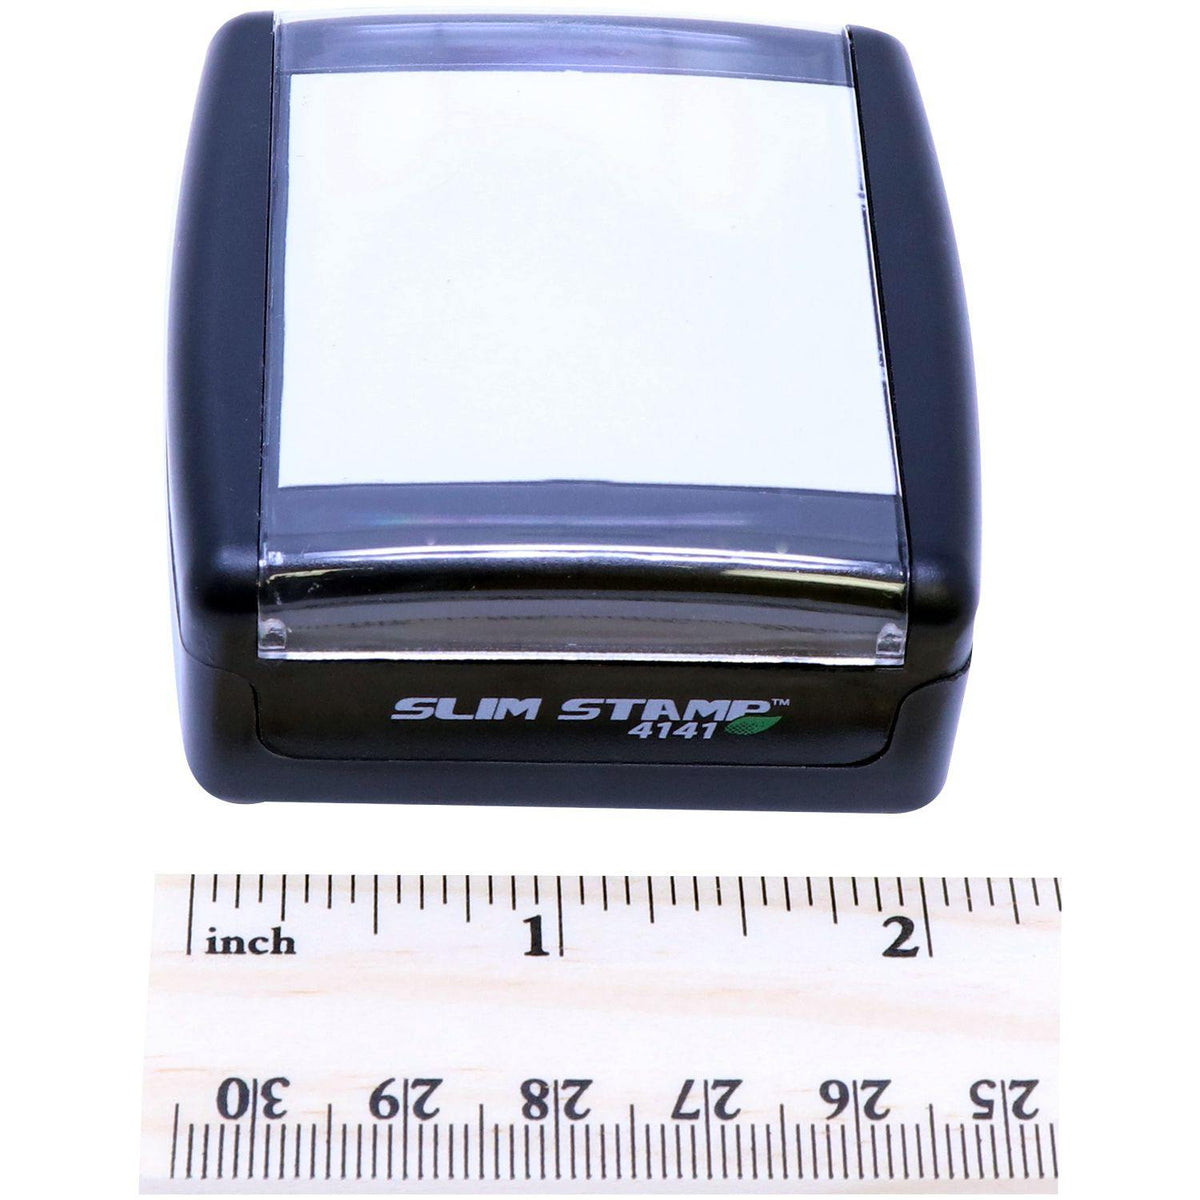 Professional Slim Pre-Inked Rubber Stamp of Seal - Engineer Seal Stamps - Stamp Type_Pre-Inked, Type of Use_Professional